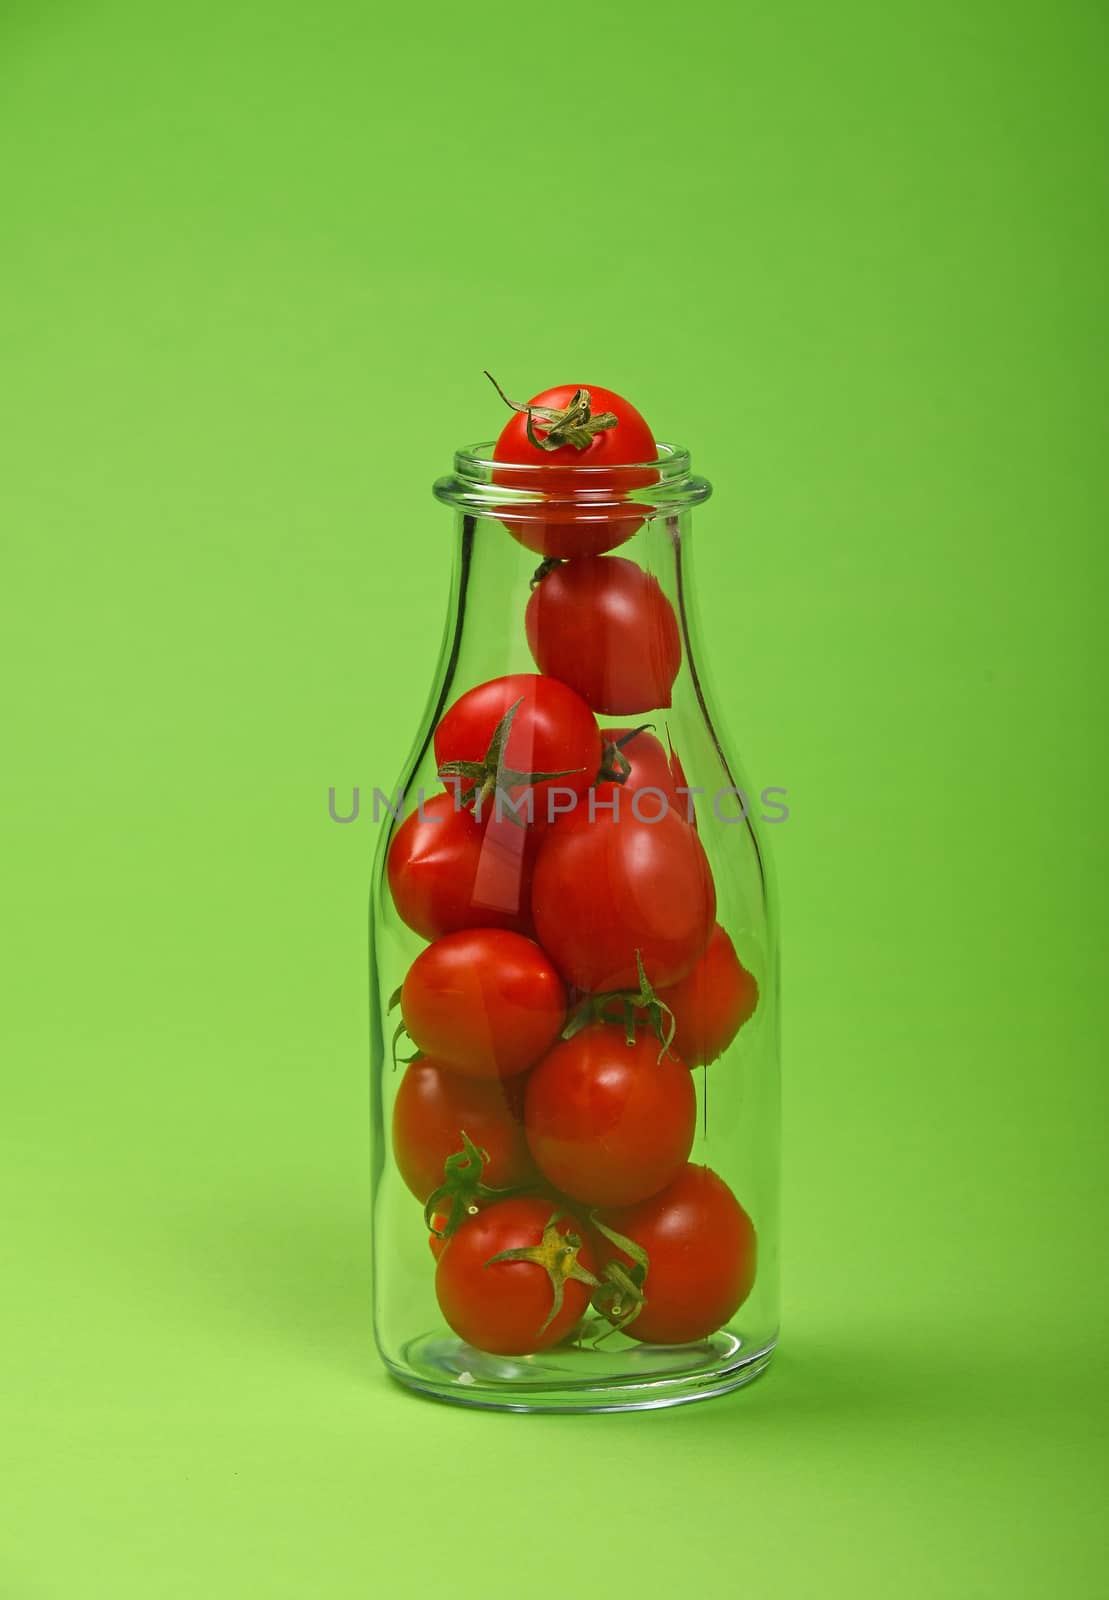 Big glass bottle full of red cherry tomatoes over green background as symbol of fresh natural organic juice or ketchup